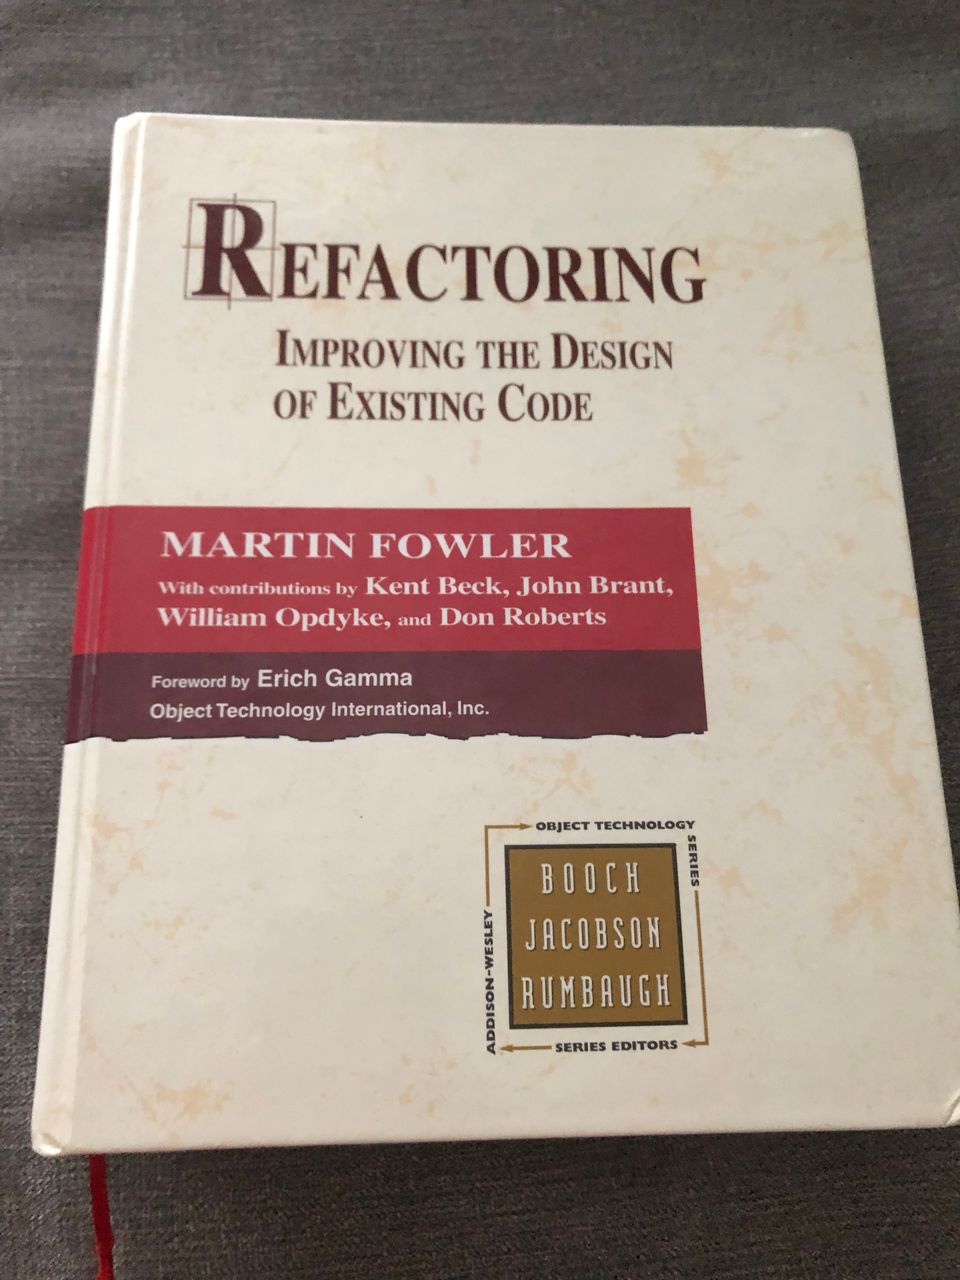 Refactoring improving the design of existing code